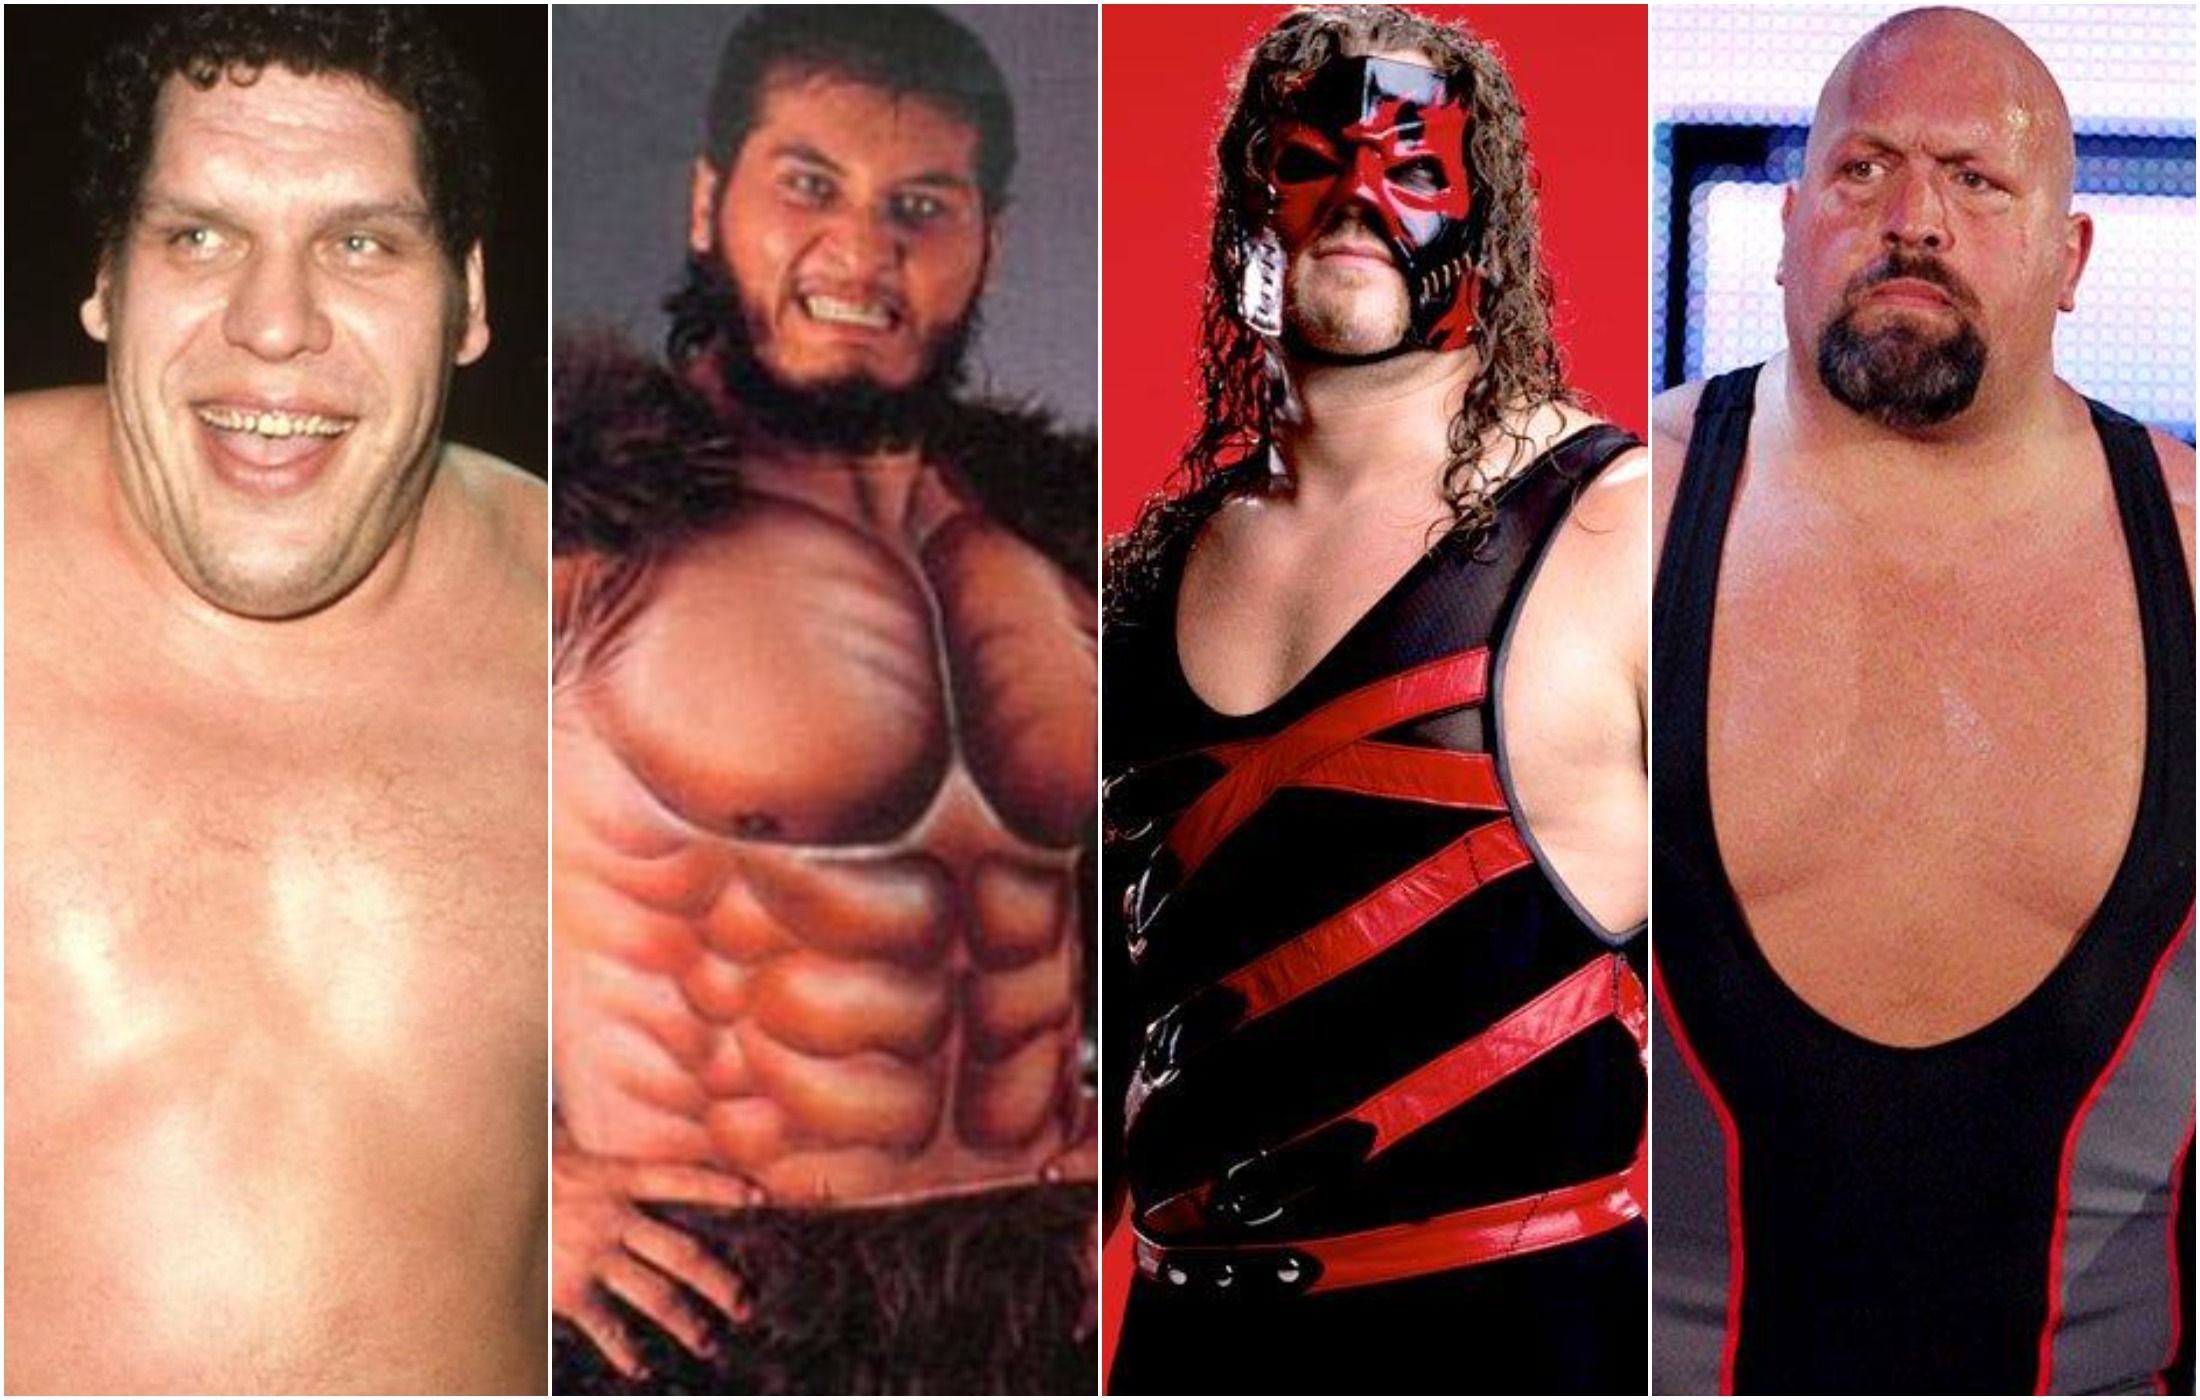 The ten tallest WWE Superstars of all-time